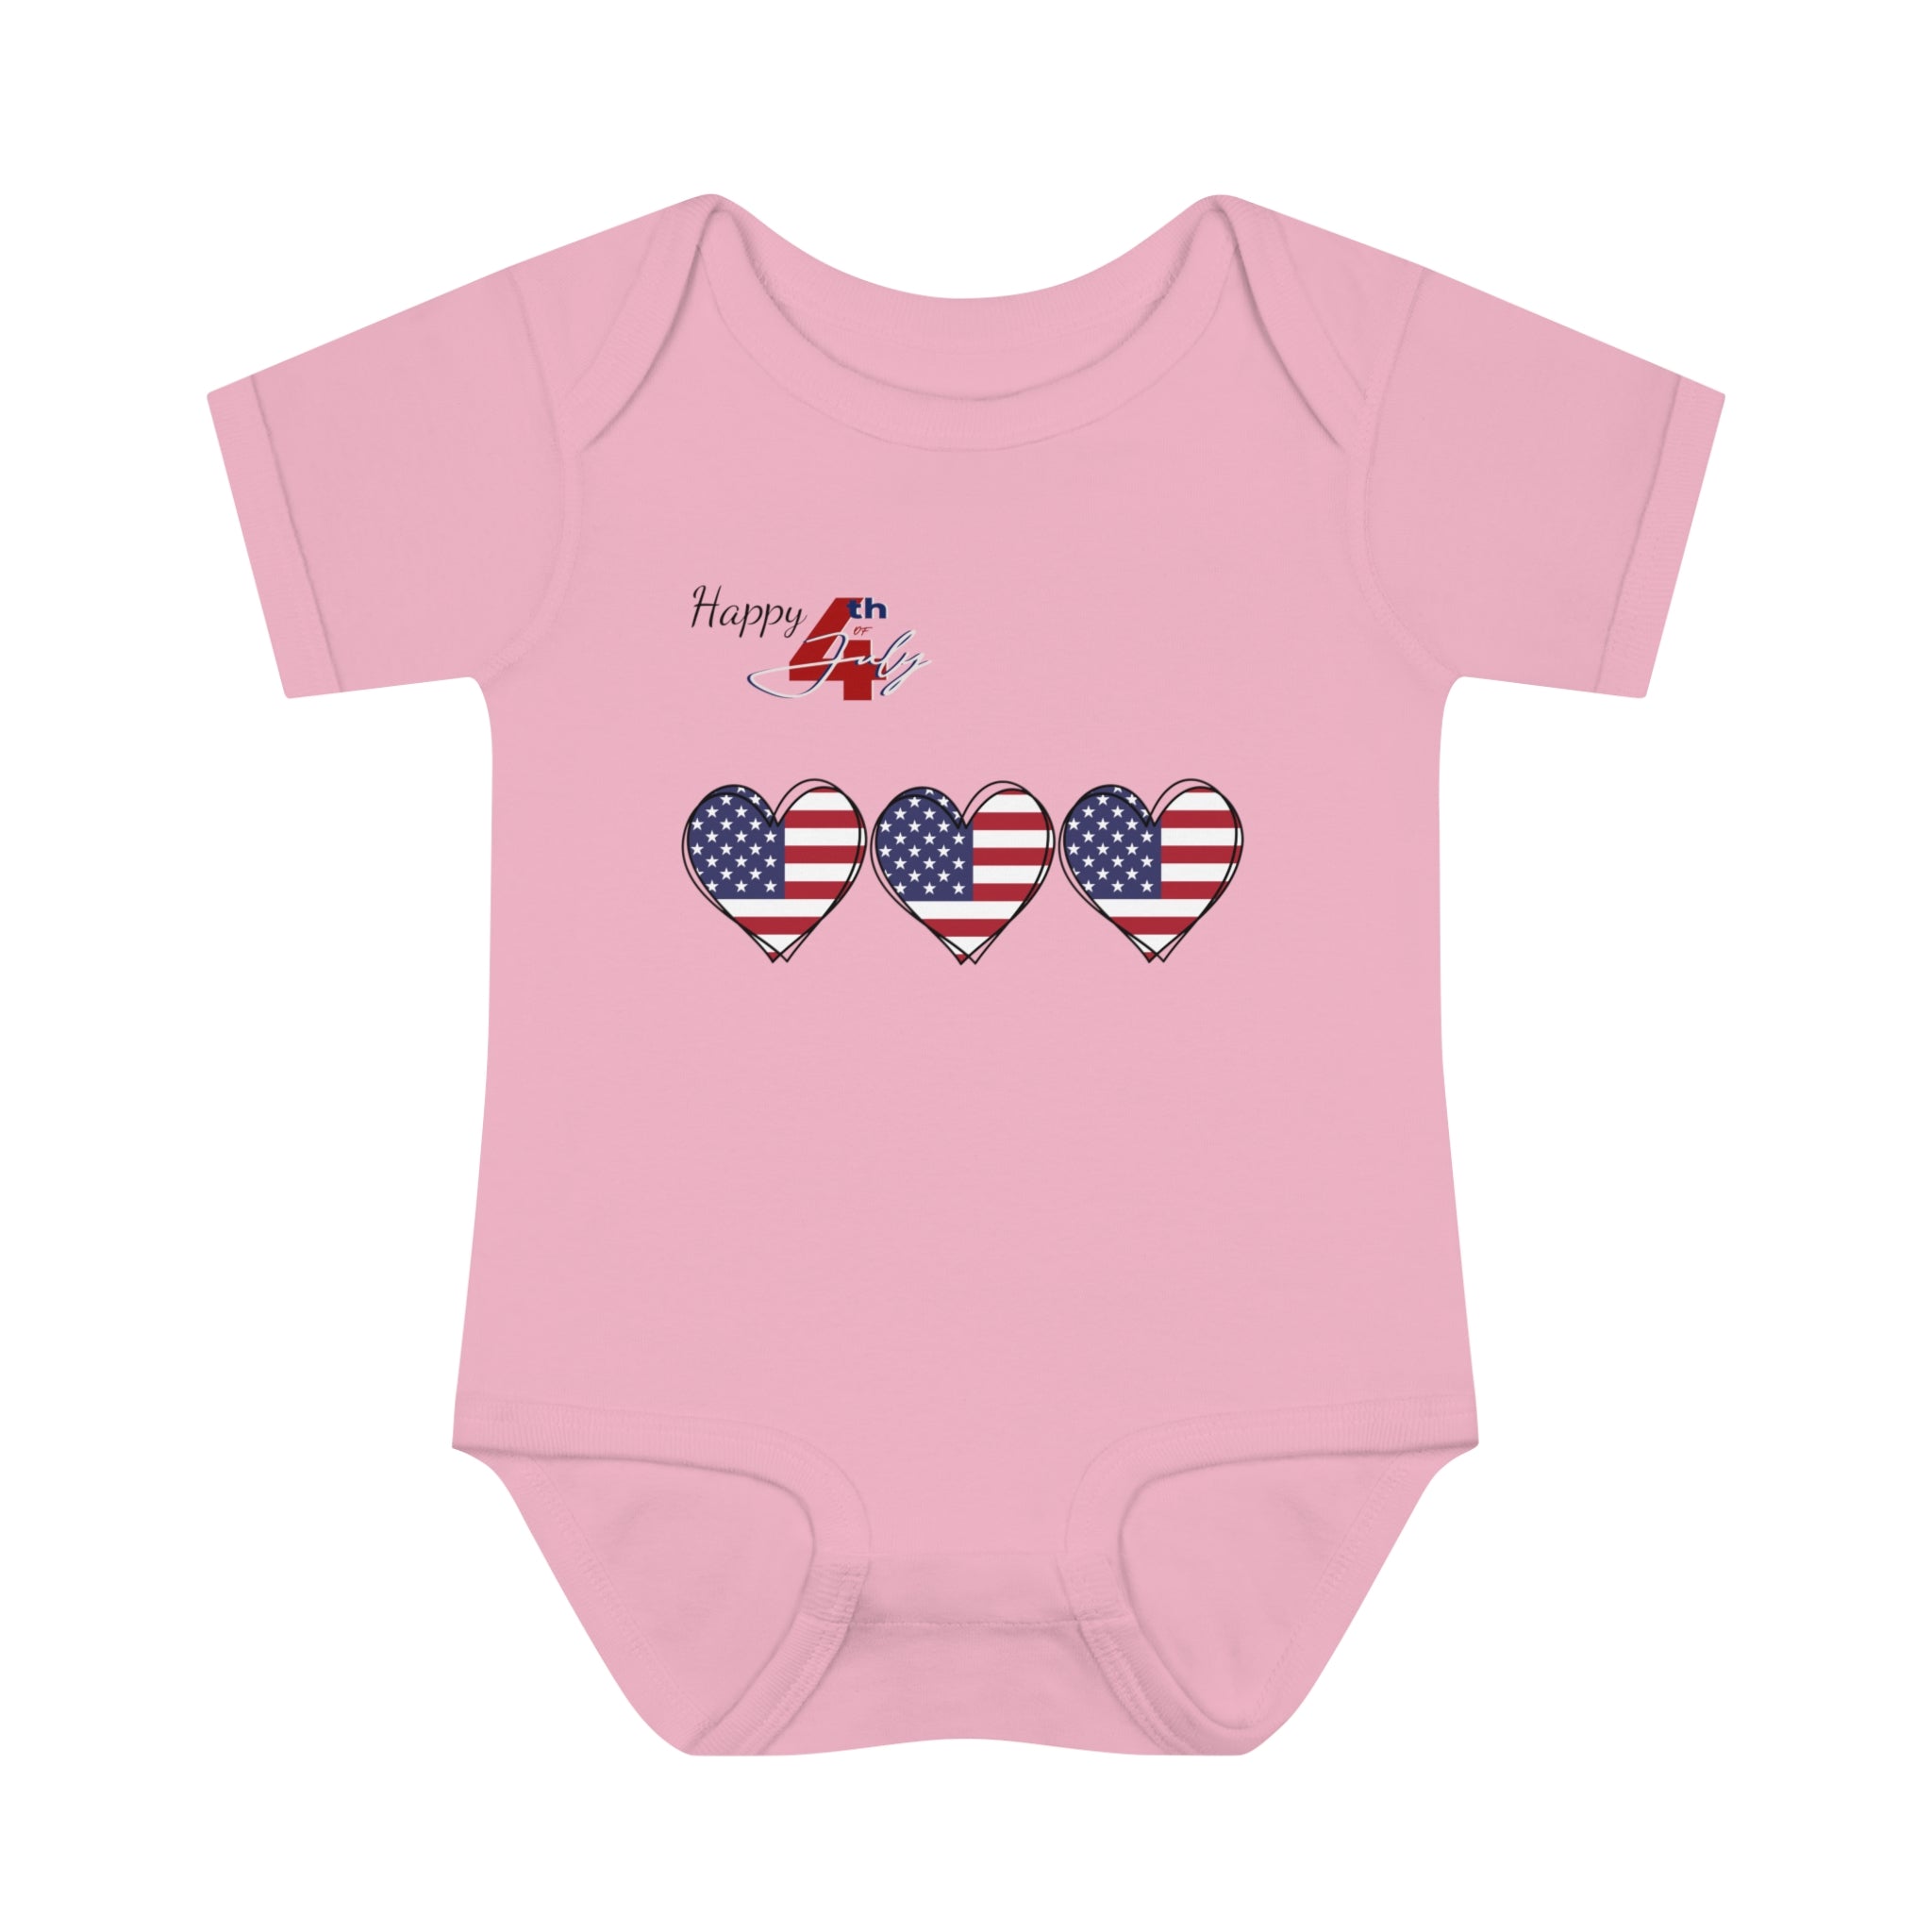 Happy 4th of July 3 Hearts Design Baby Bodysuit